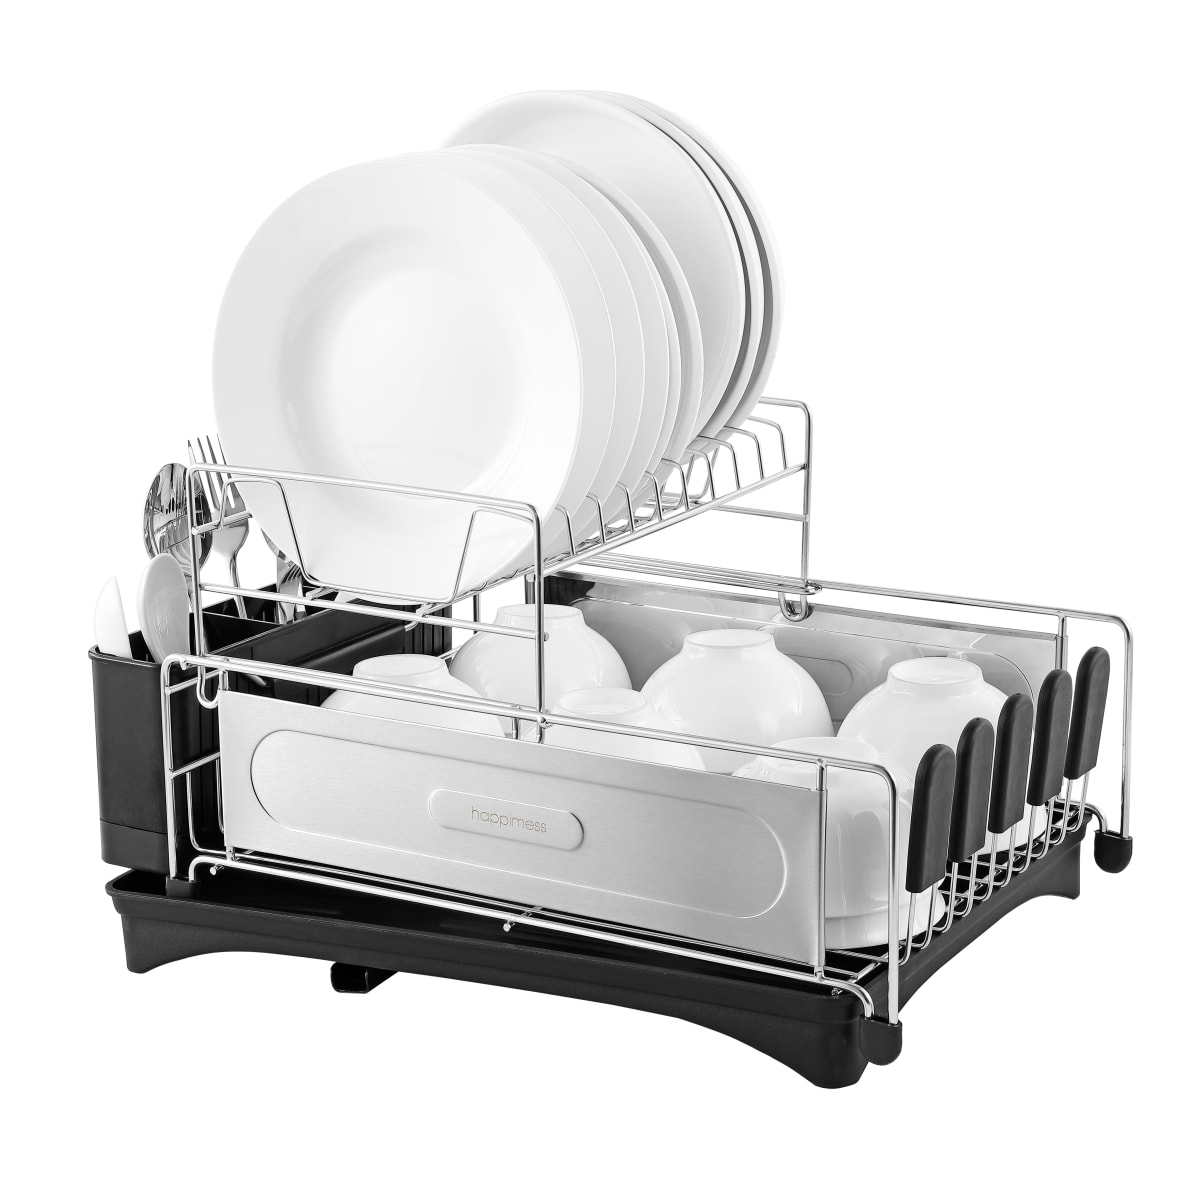 Compact 2-Tier Fingerprint-Proof Stainless Steel Dish Drying Rack